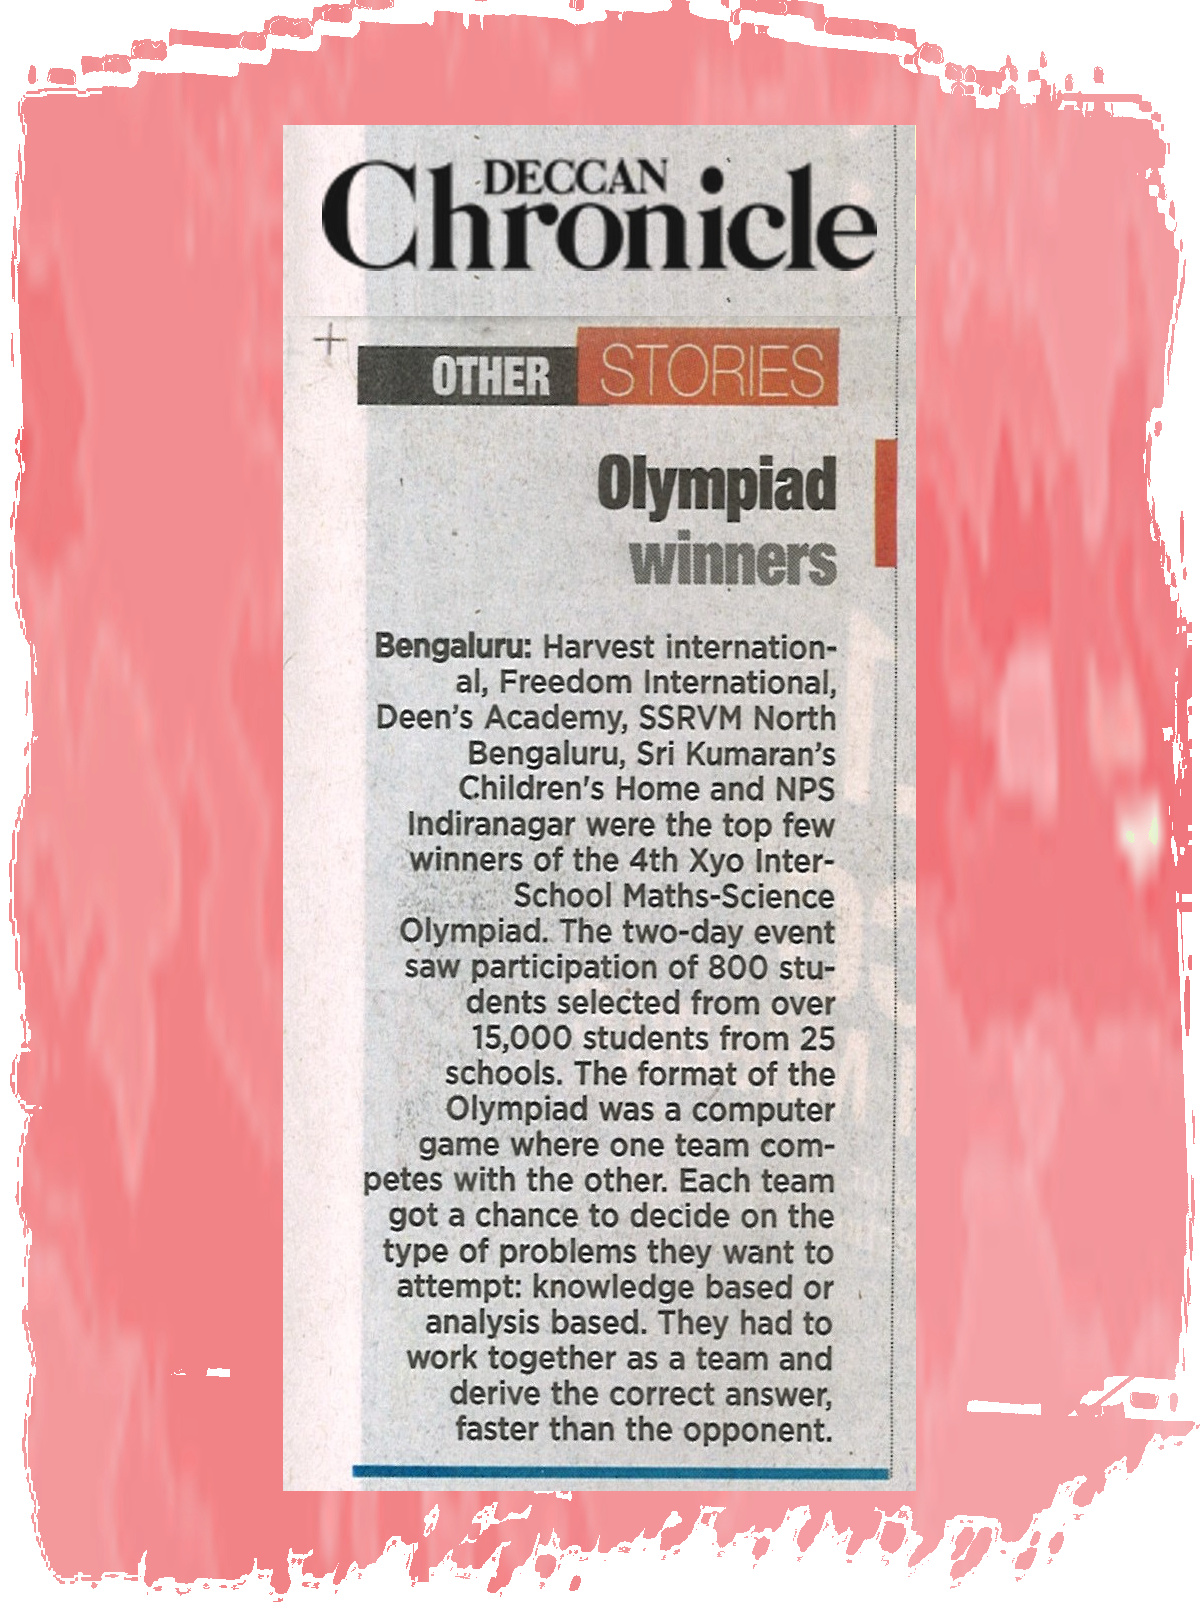 Xyo Maths in Deccan Chronicle